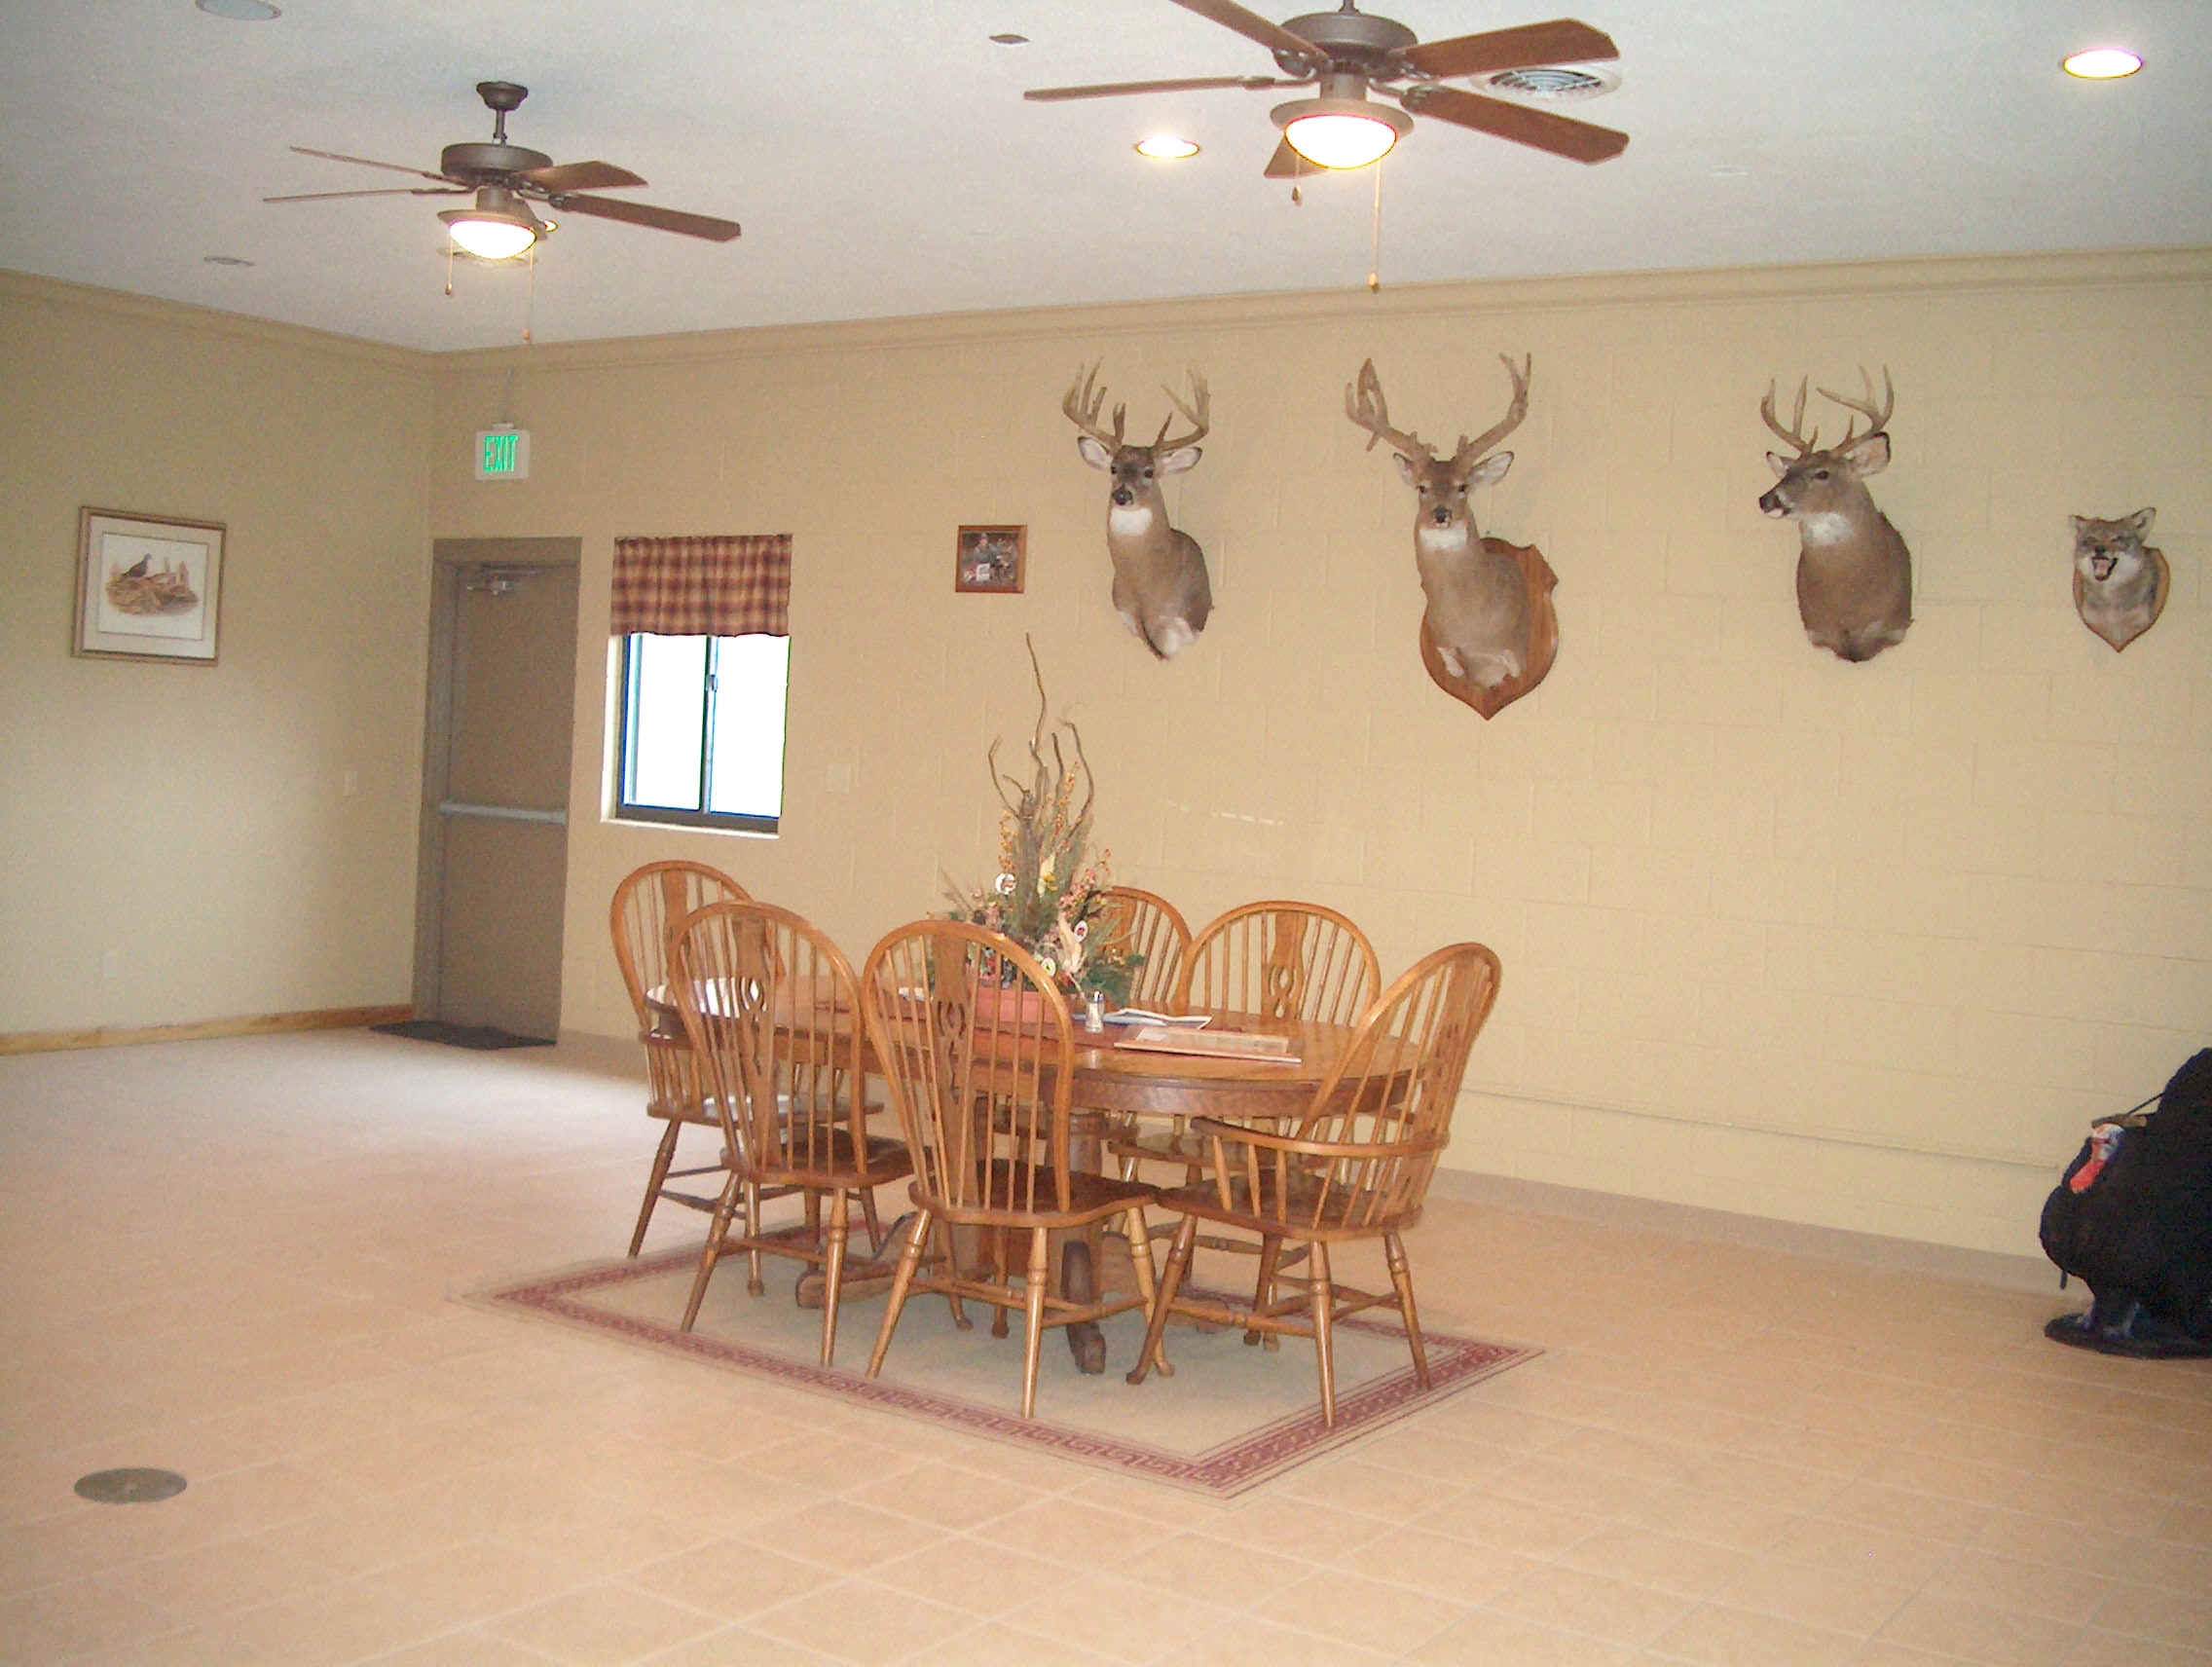 Dining area - Langham Outdoors Lodge building